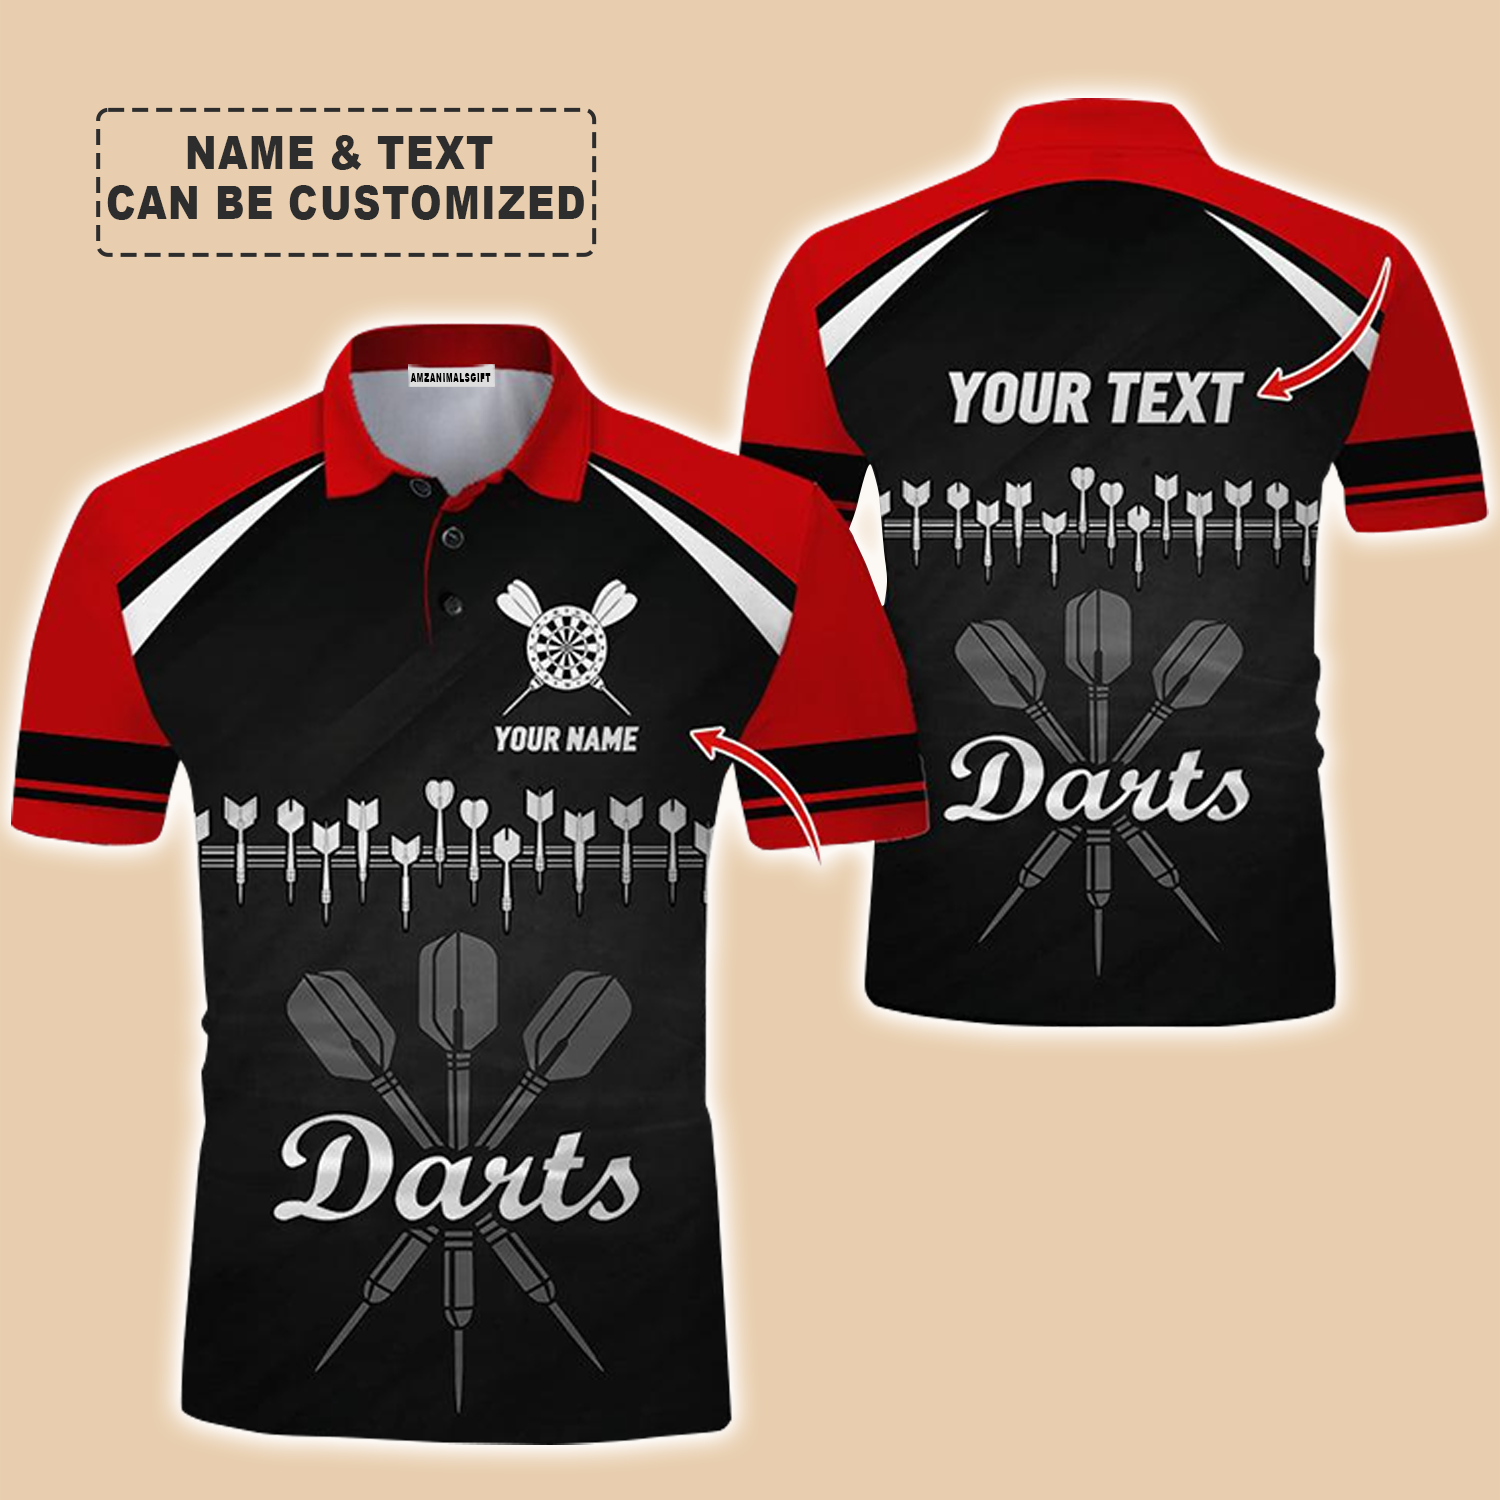 Customized Name & Text Darts Polo Shirt, Personalized Darts Team Uniforms Polo Shirt For Men - Perfect Gift For Darts Lovers, Darts Team Players